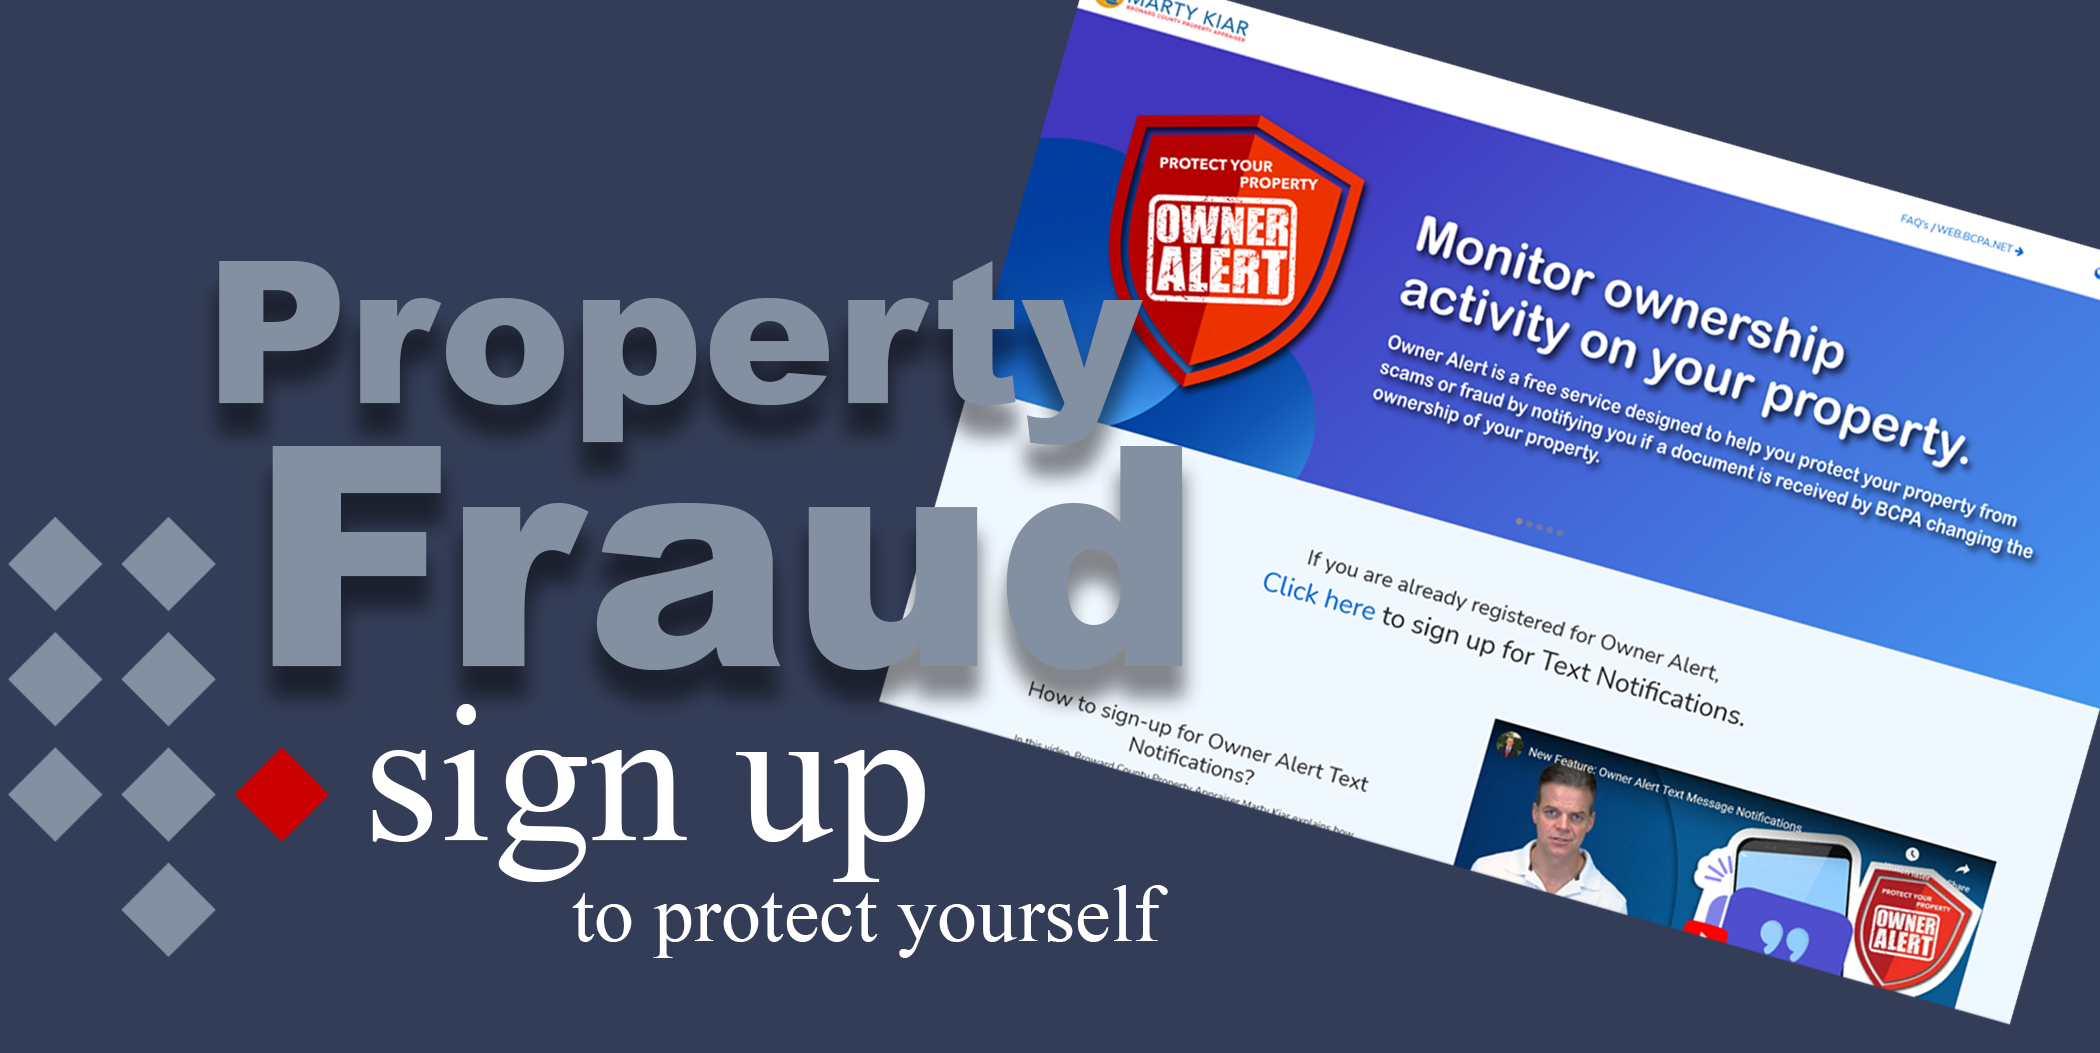 Tax Property Deed Fraud Alert & Sign Up